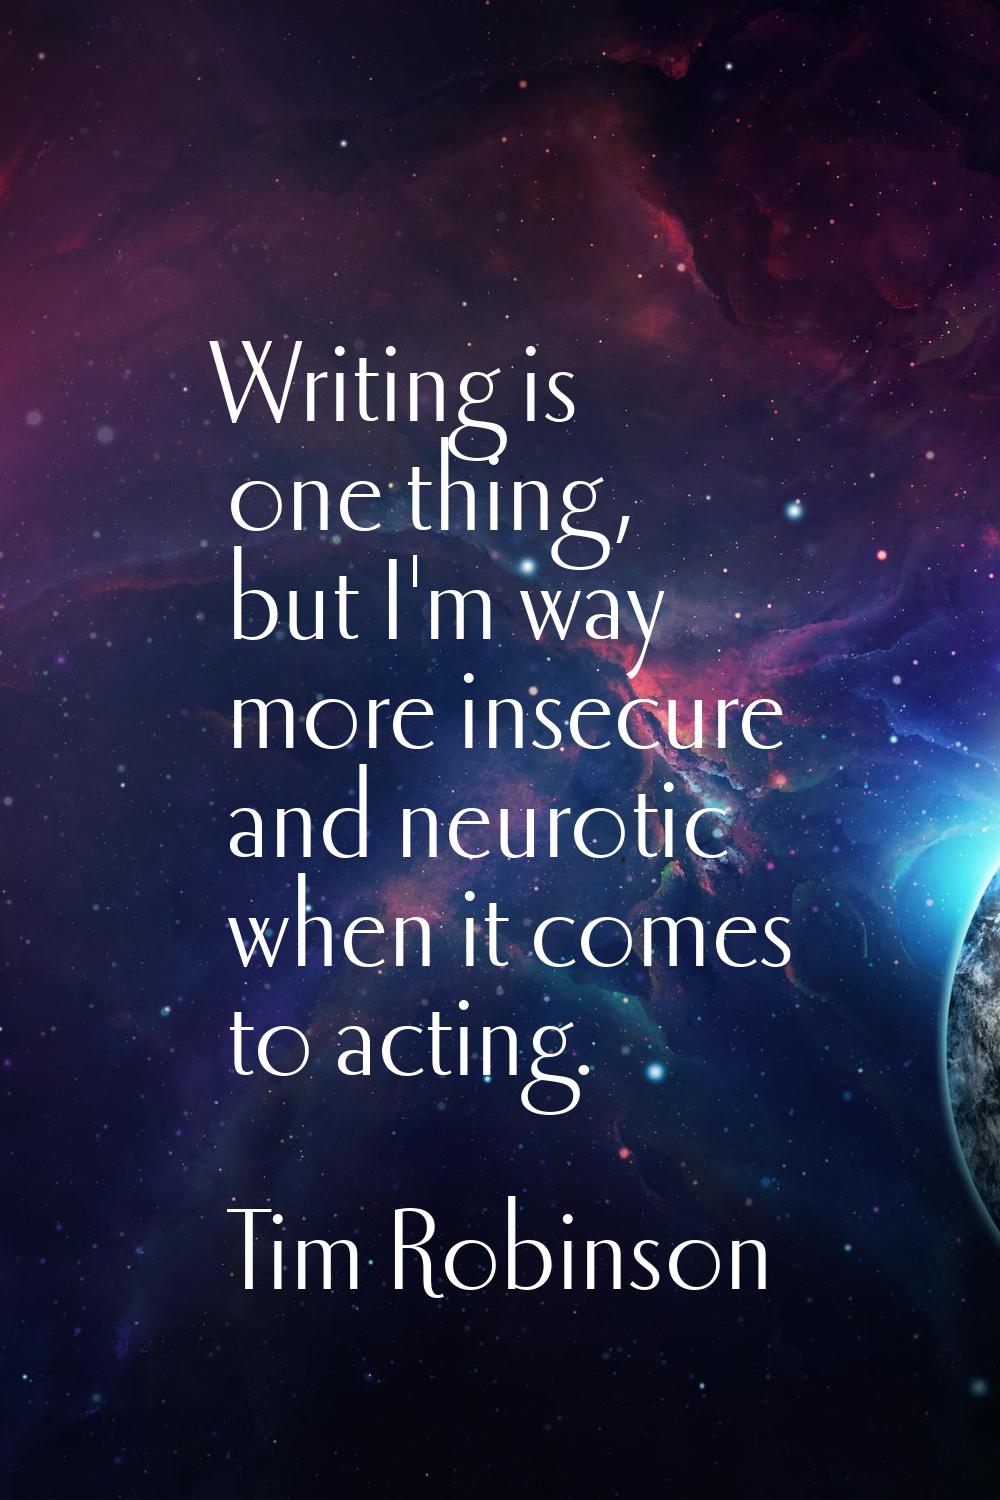 Writing is one thing, but I'm way more insecure and neurotic when it comes to acting.